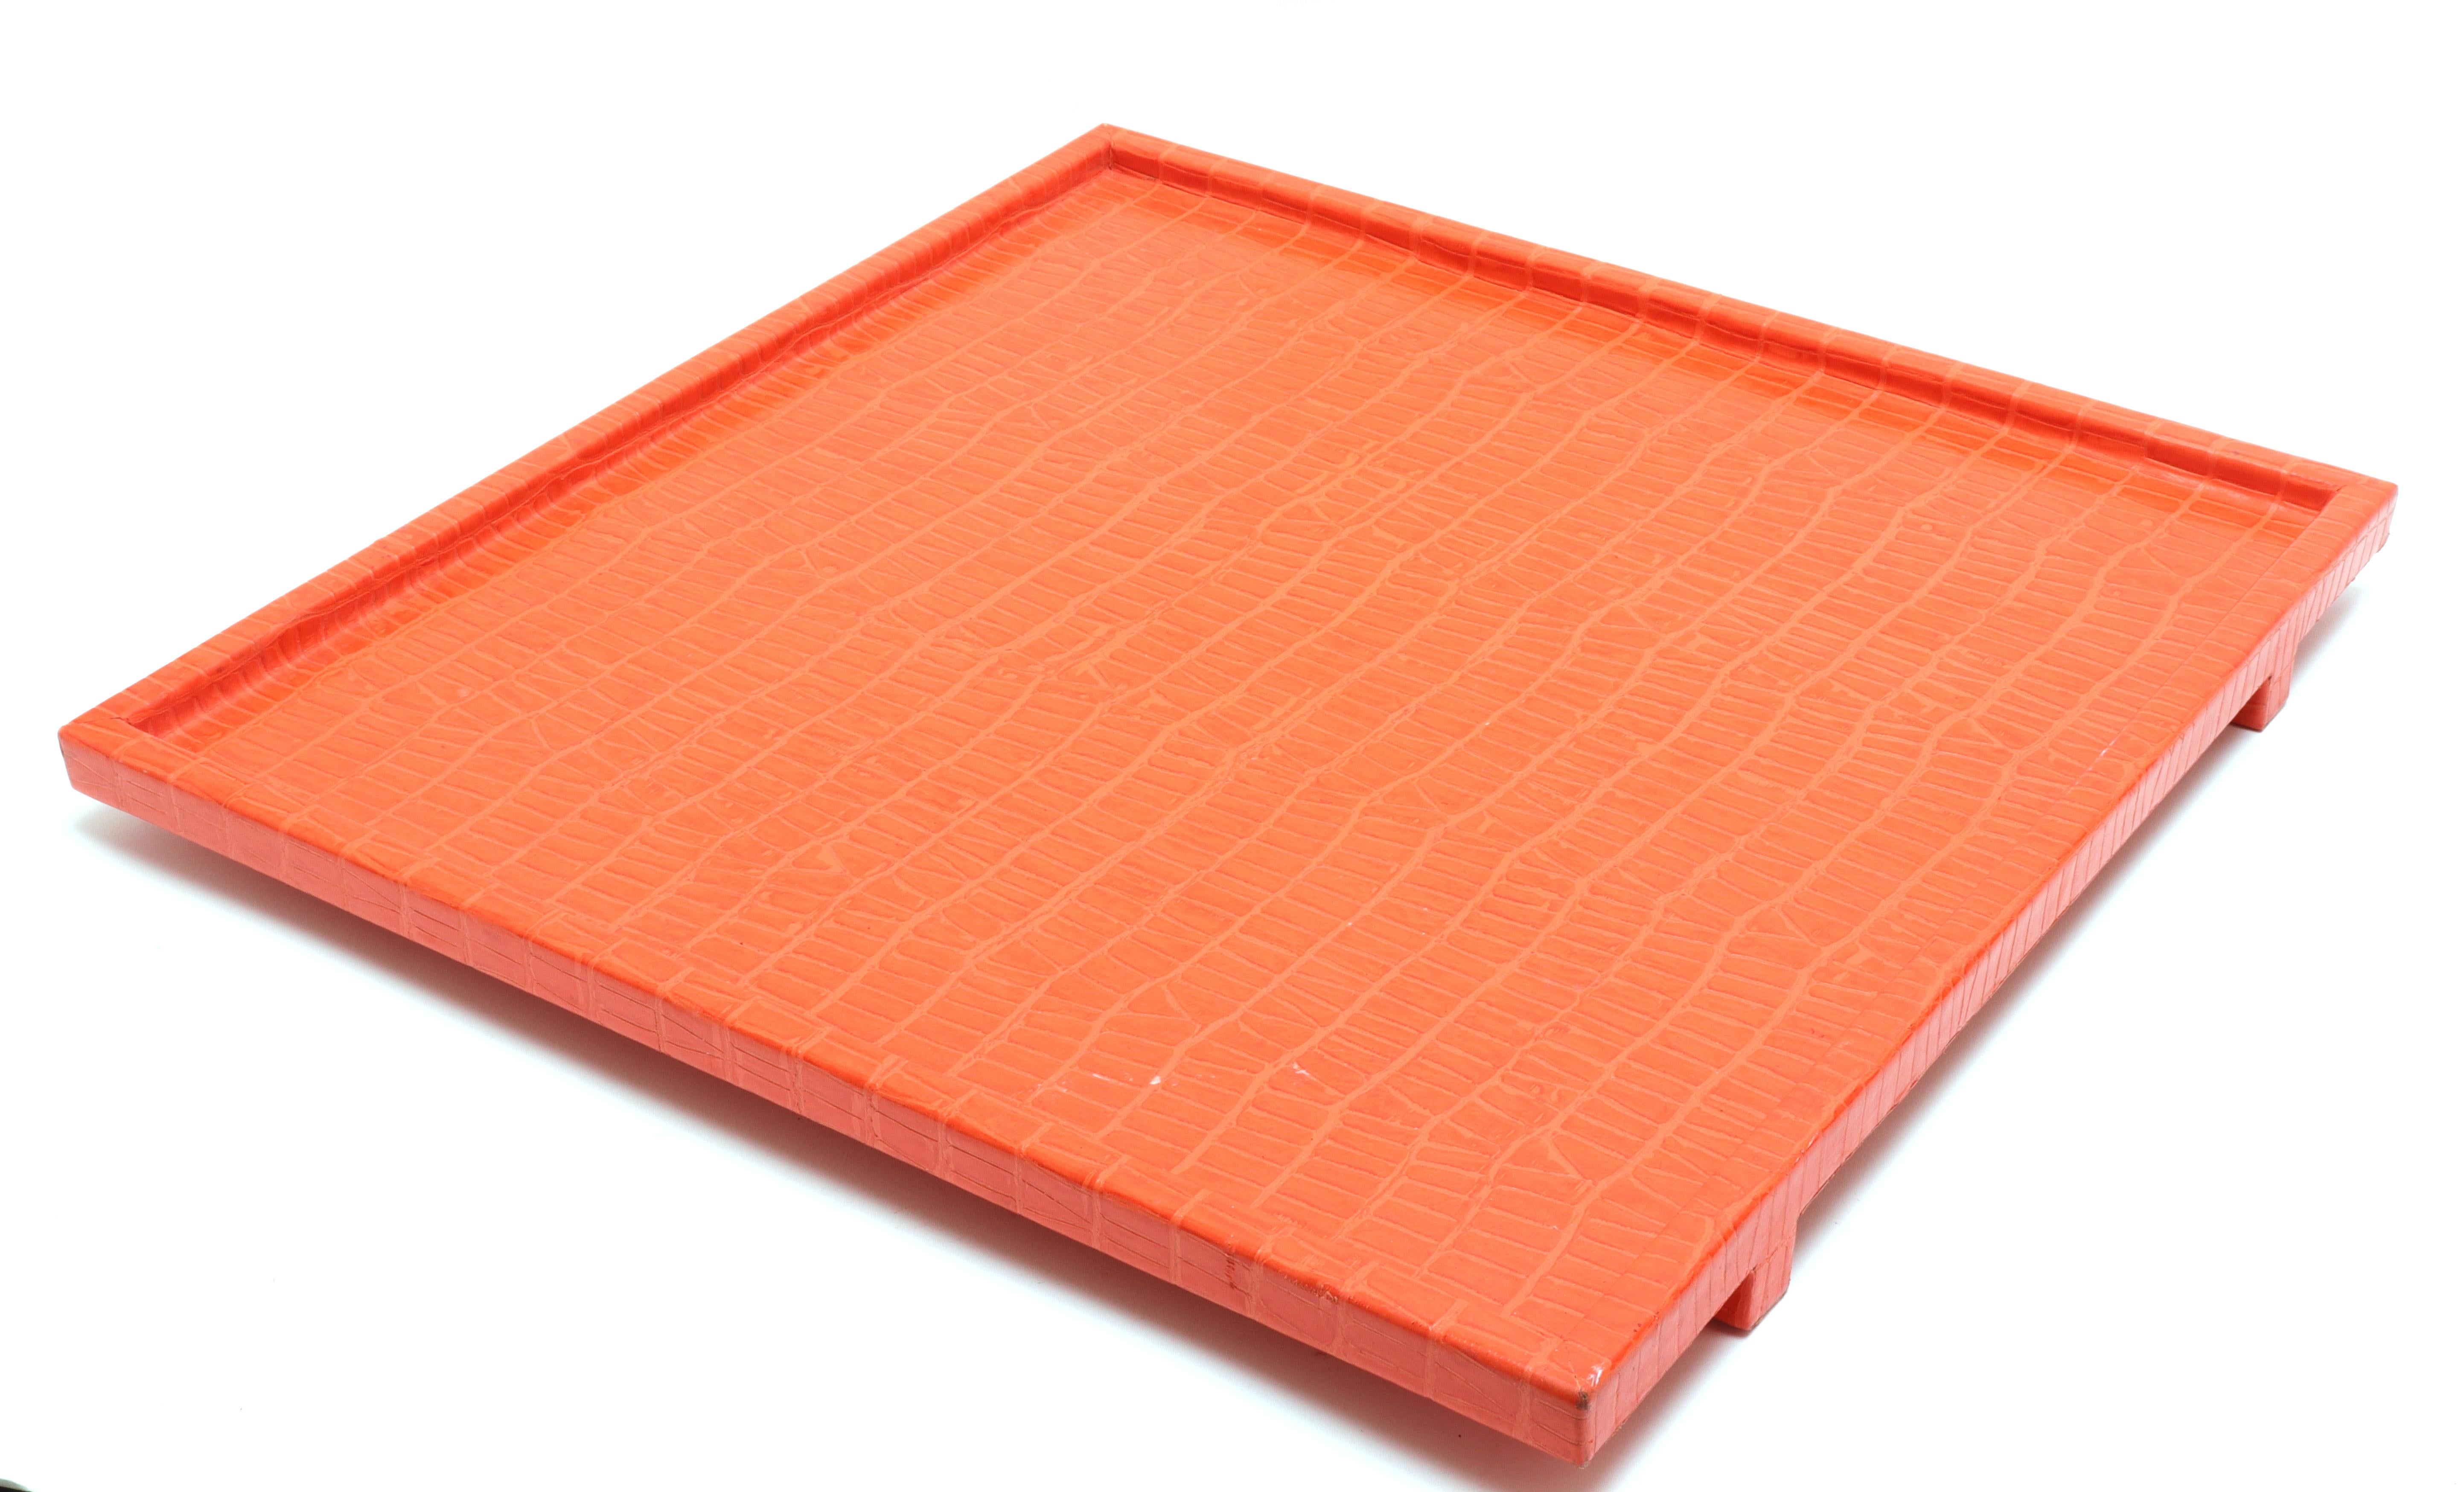 Garrison Rousseau modern square serving tray in orange faux-leather. The piece has a makers mark on the bottom and is in great vintage condition with age-appropriate wear and use.